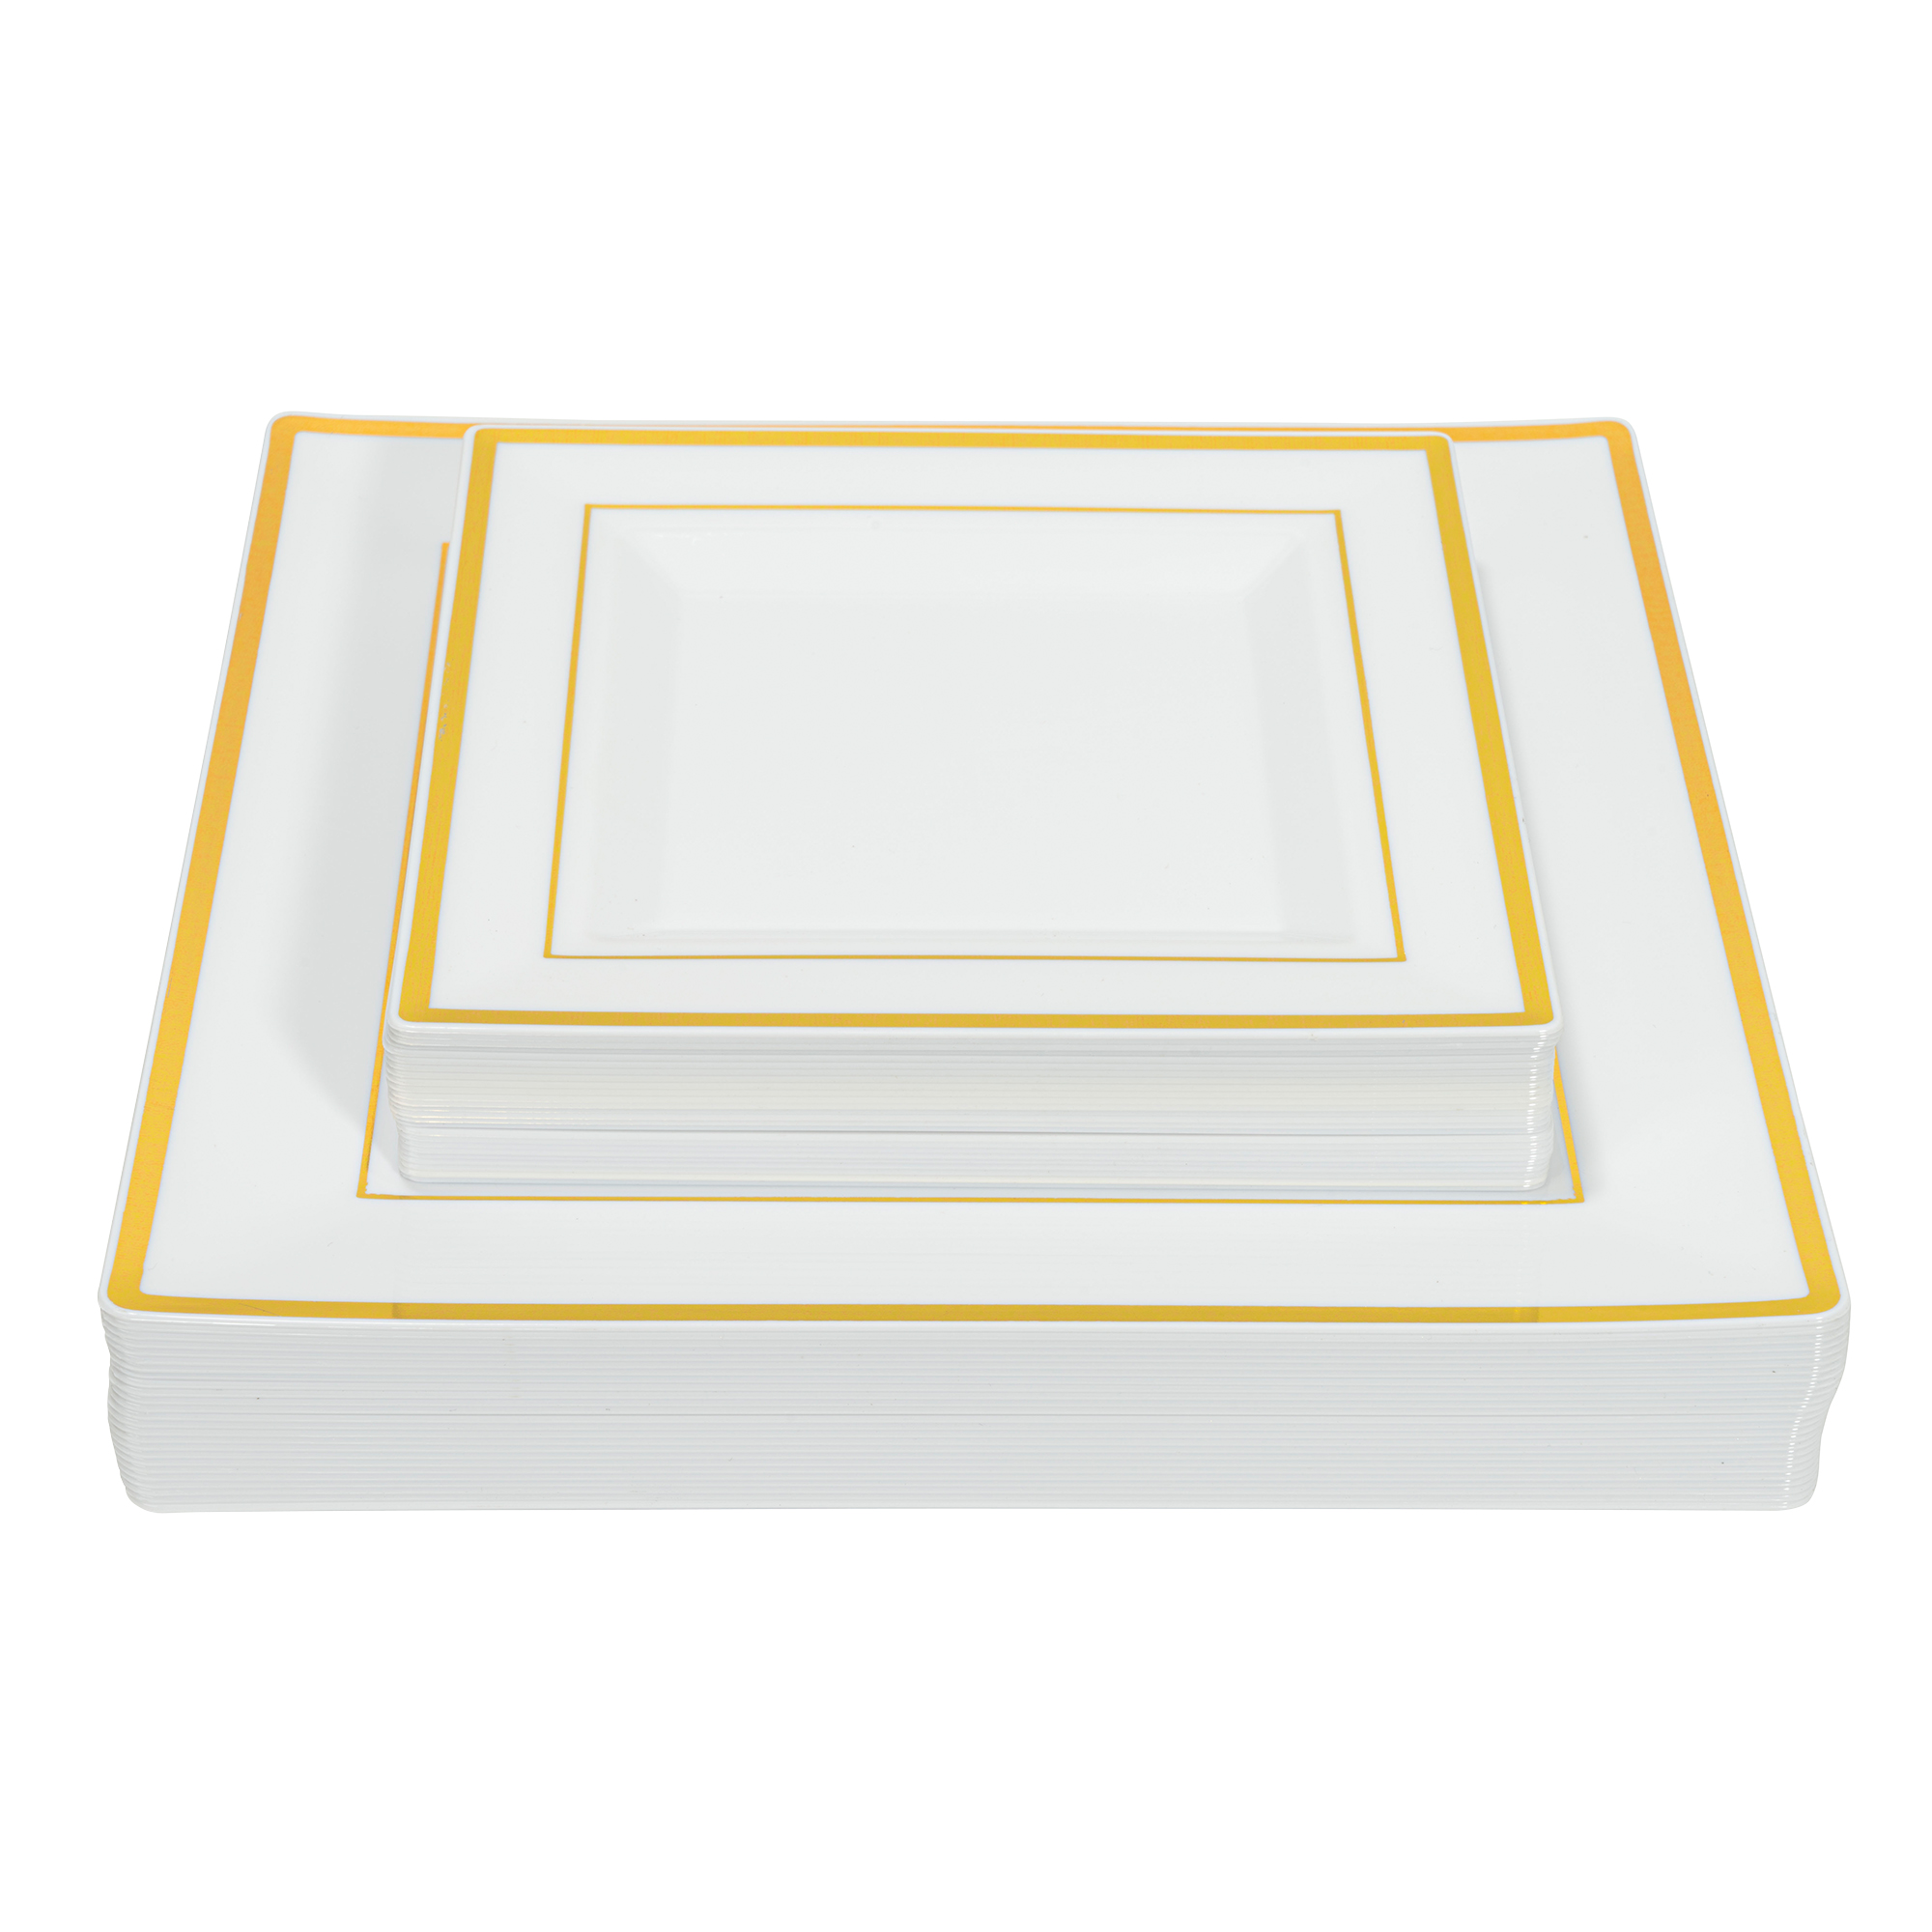 Deluxe Square Plate Set 50pc/set - Gold